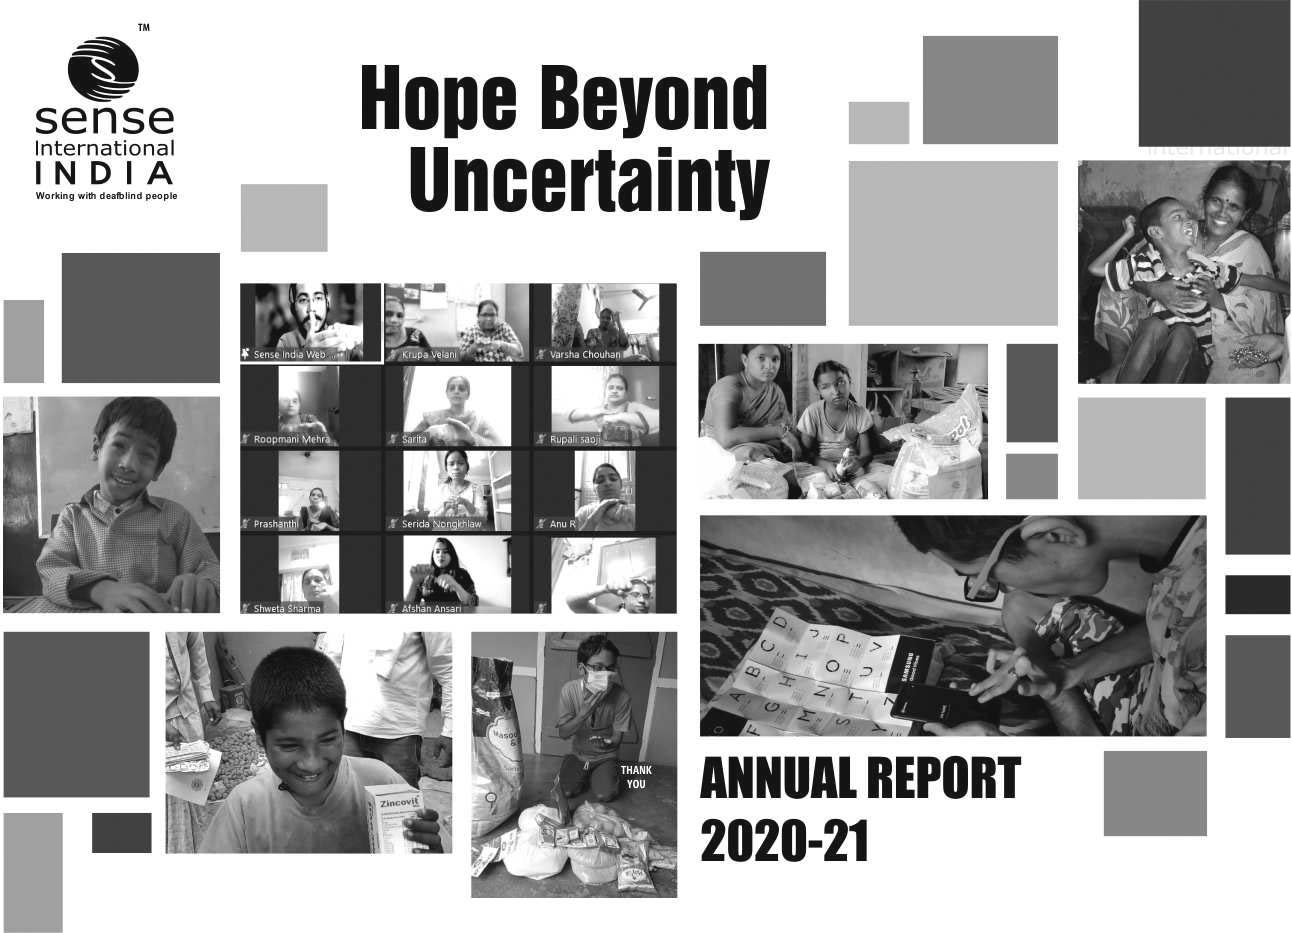 Annual Report of Sense International India for the year 2020 - 2021 class=